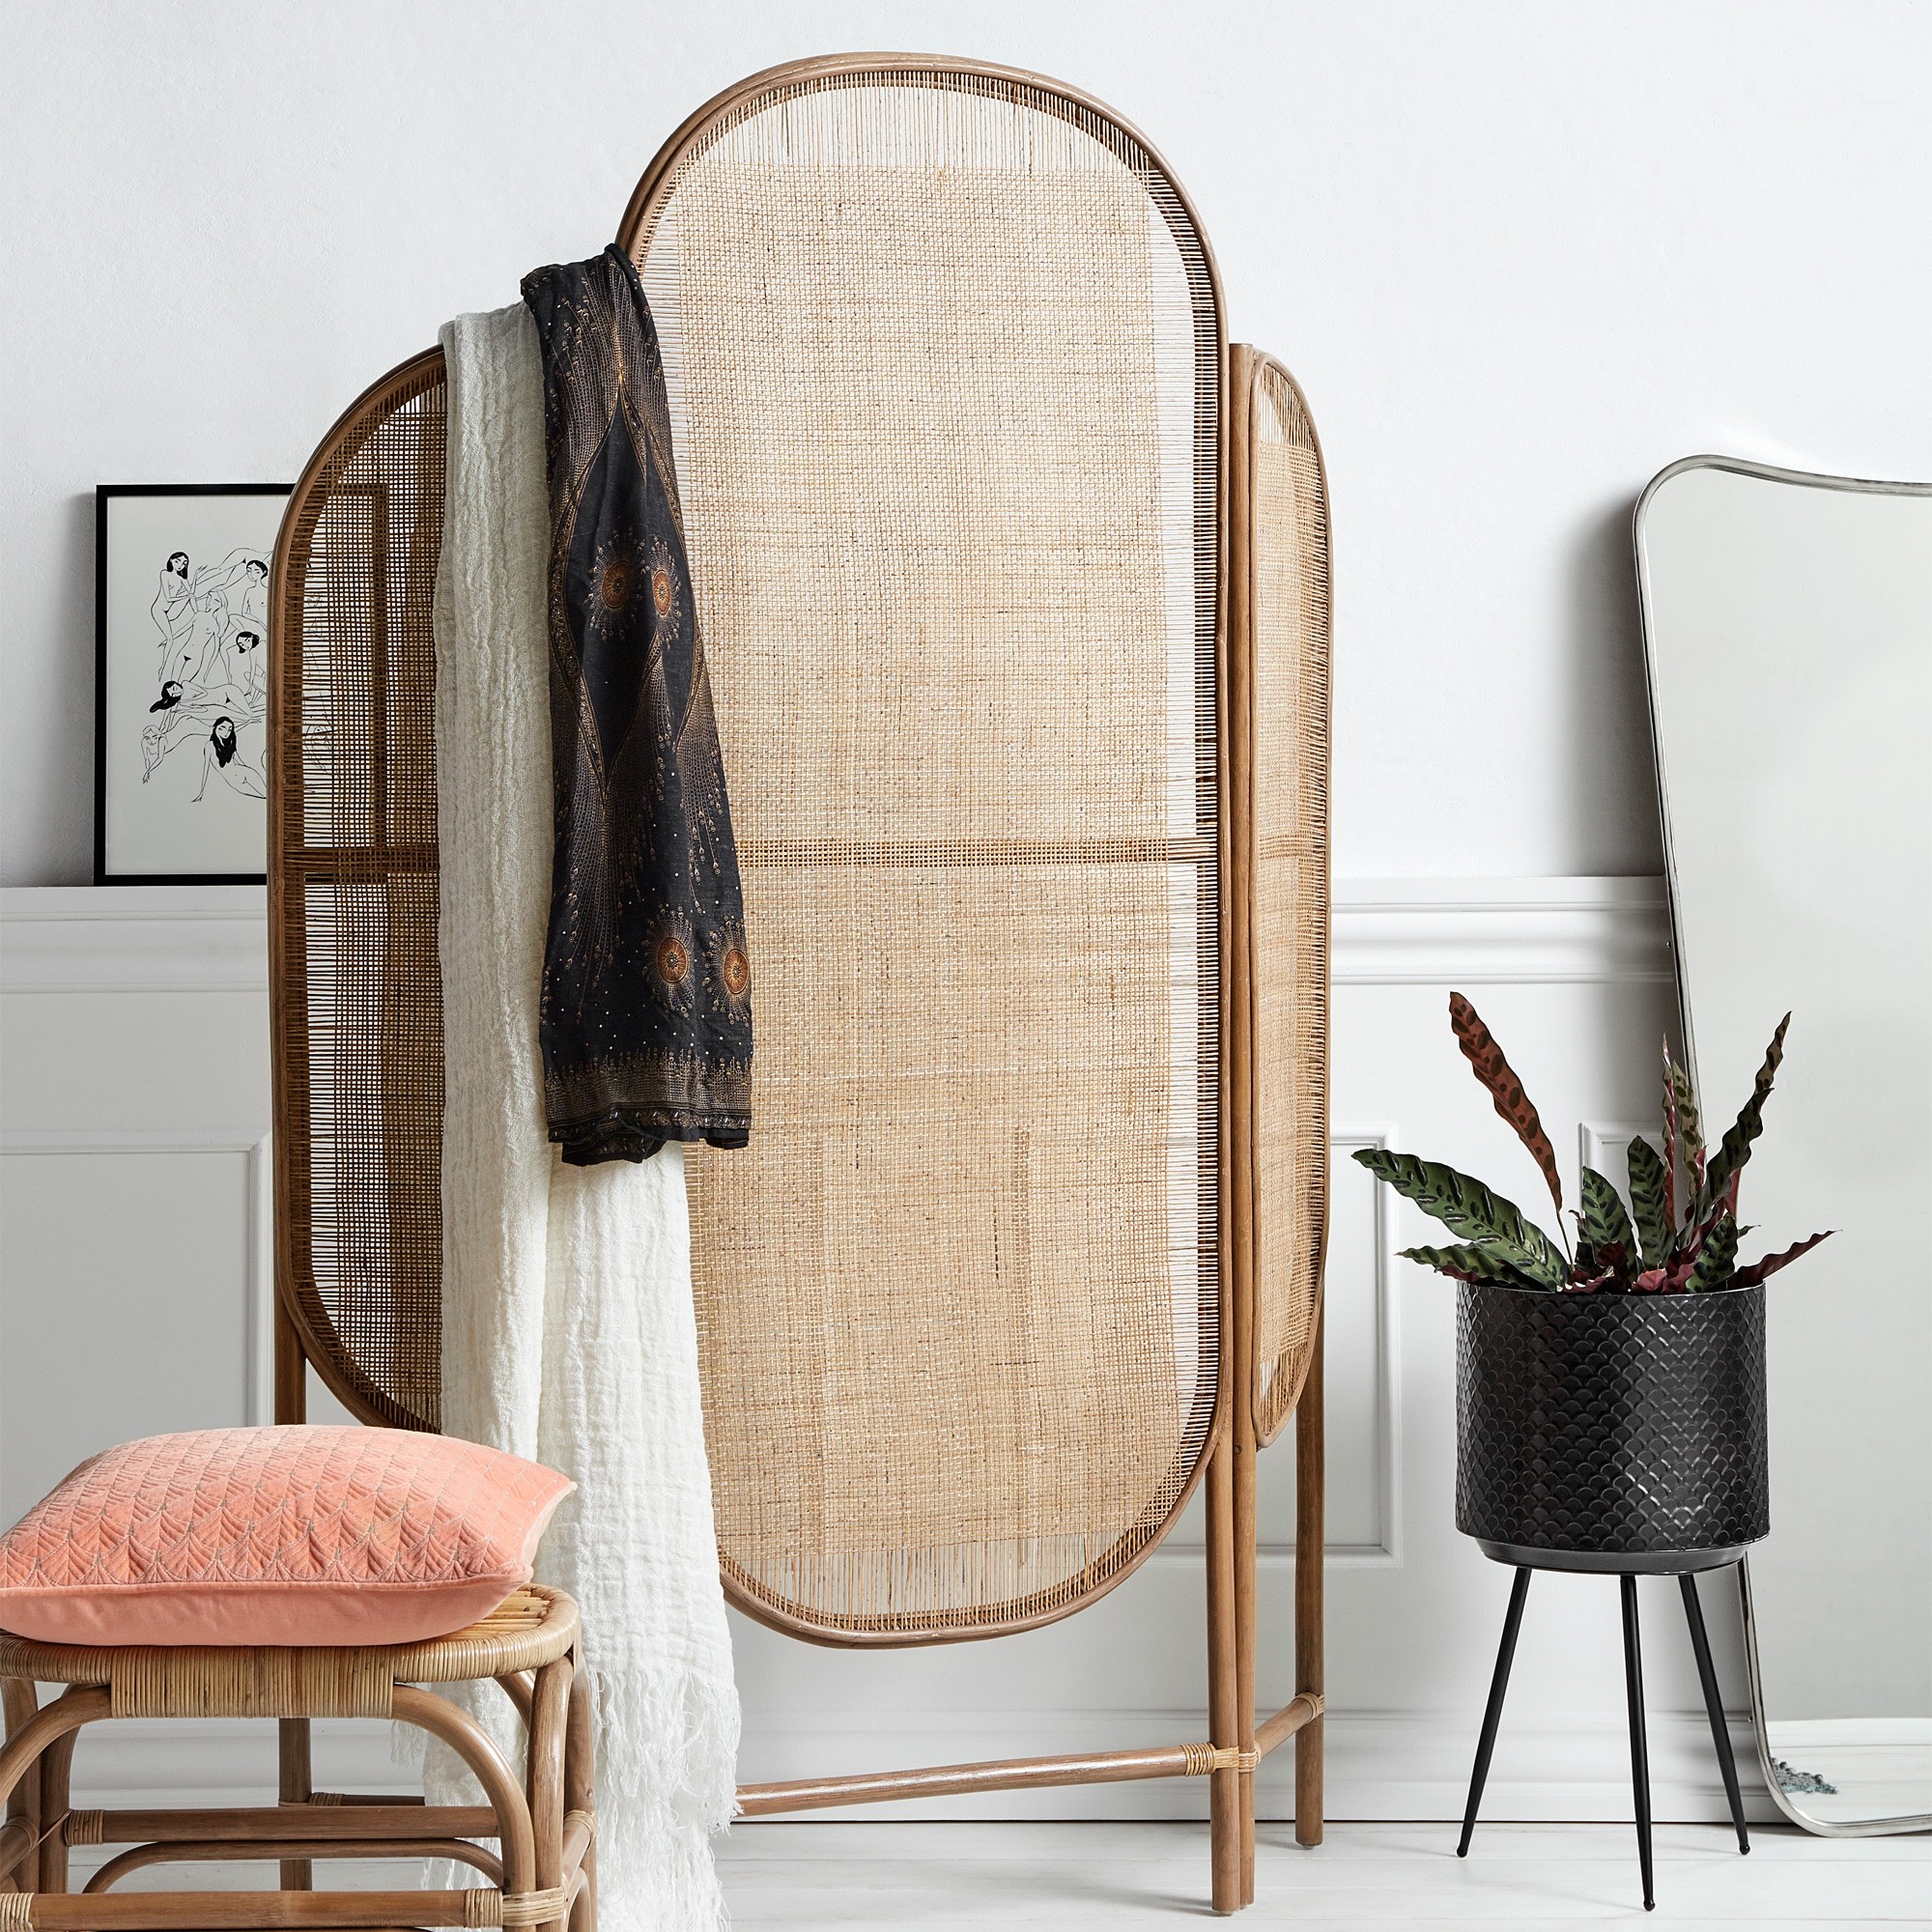 A folding screen with rustic woven panels adds heritage charm. Image: Out There Interiors